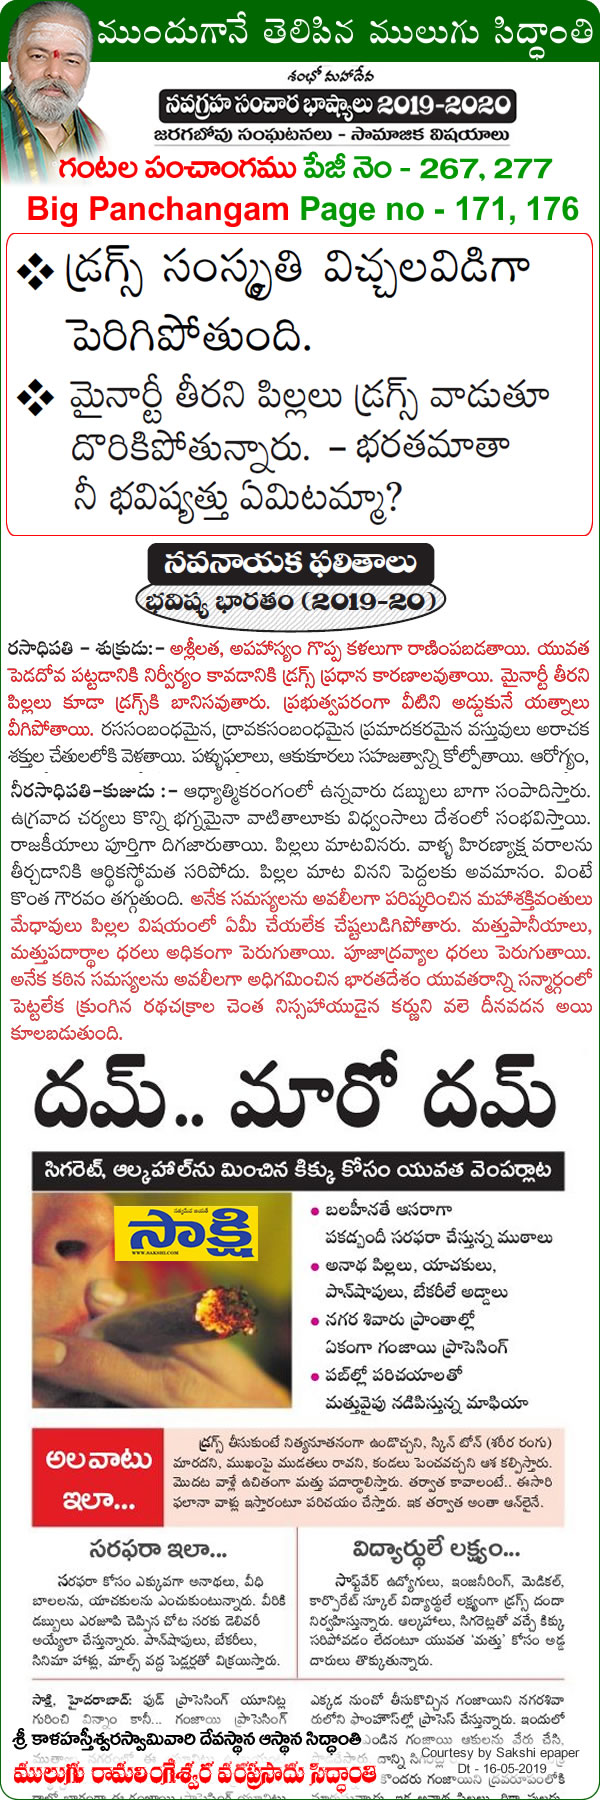 Mulugu Siddanthi Proven Prediction Mulugu-Prediction Hooked-to-drugs-in-school-and-college-Hyderabad-s-young-on-a-high-drugs-use-students-and-parties-in-hyderabad -Print-media-by Sakshi,Vaartha, Times of Indida, Namaste Telangana